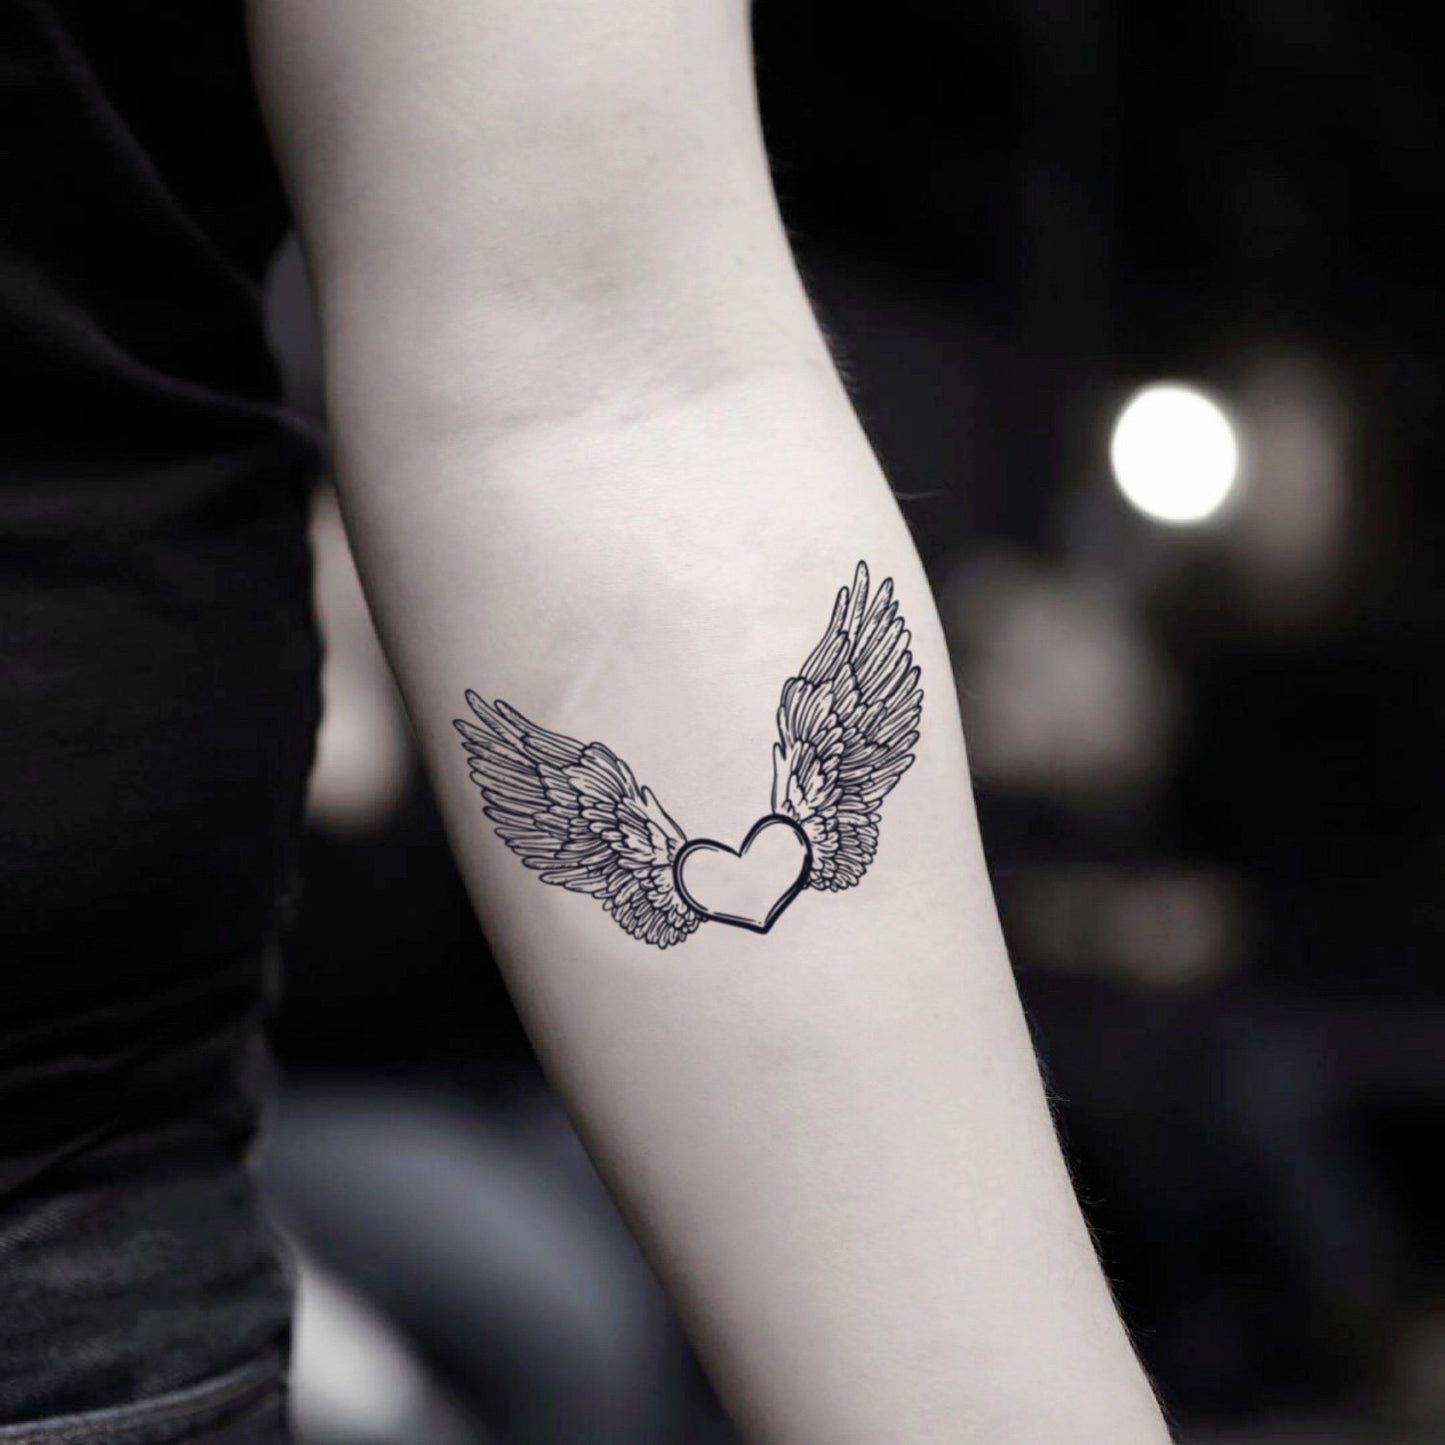 fake small heart with angel wings illustrative temporary tattoo sticker design idea on inner arm